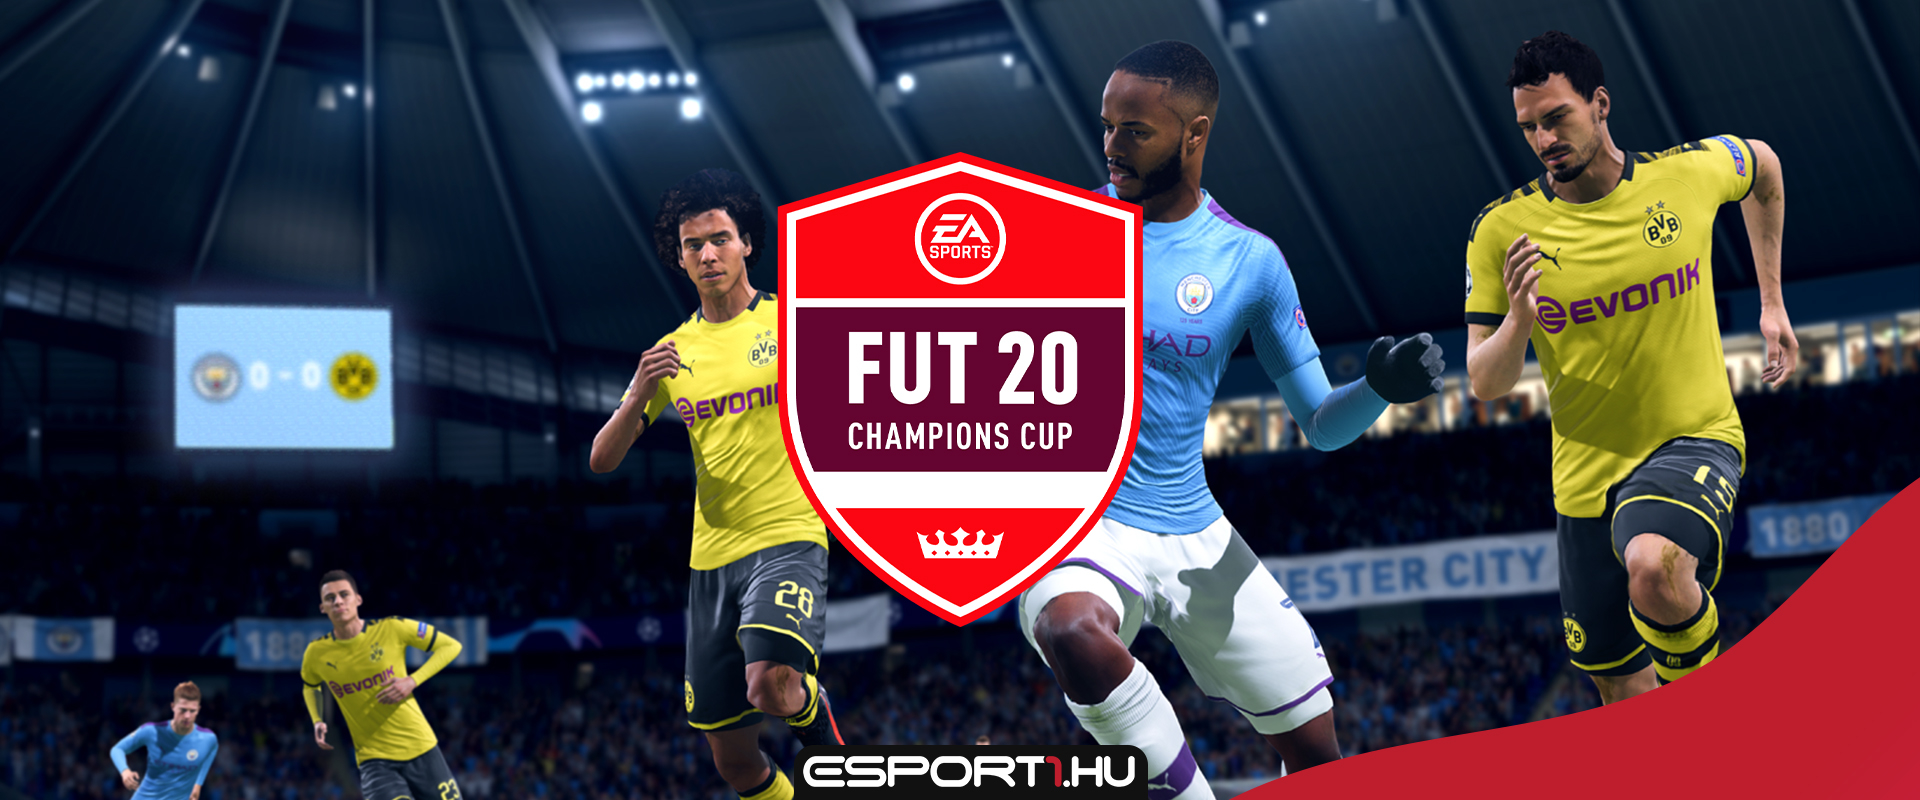 Magyar siker a FUT Champions Cup Stage II FIFA versenyén!